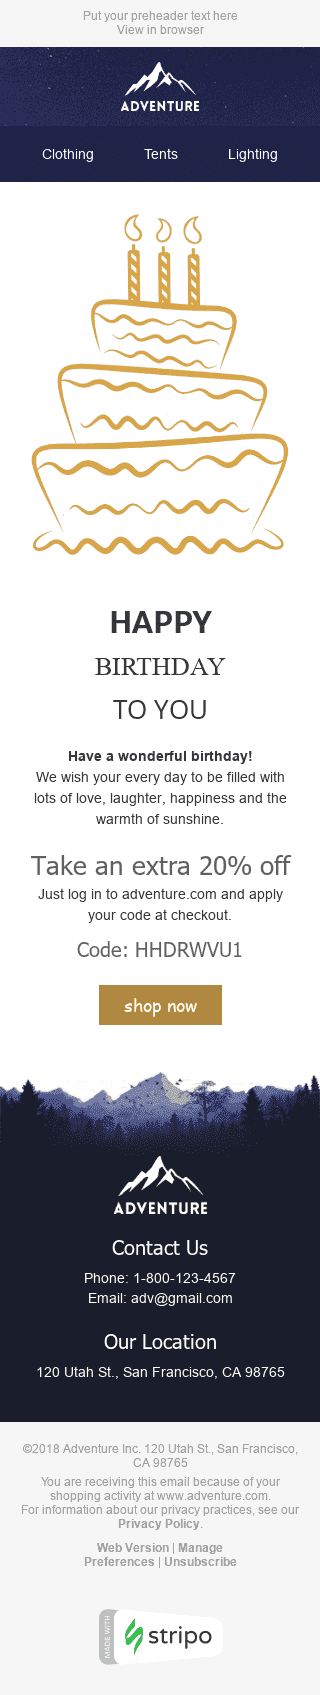 Birthday Email Template "Good Cake" for Tourism industry mobile view